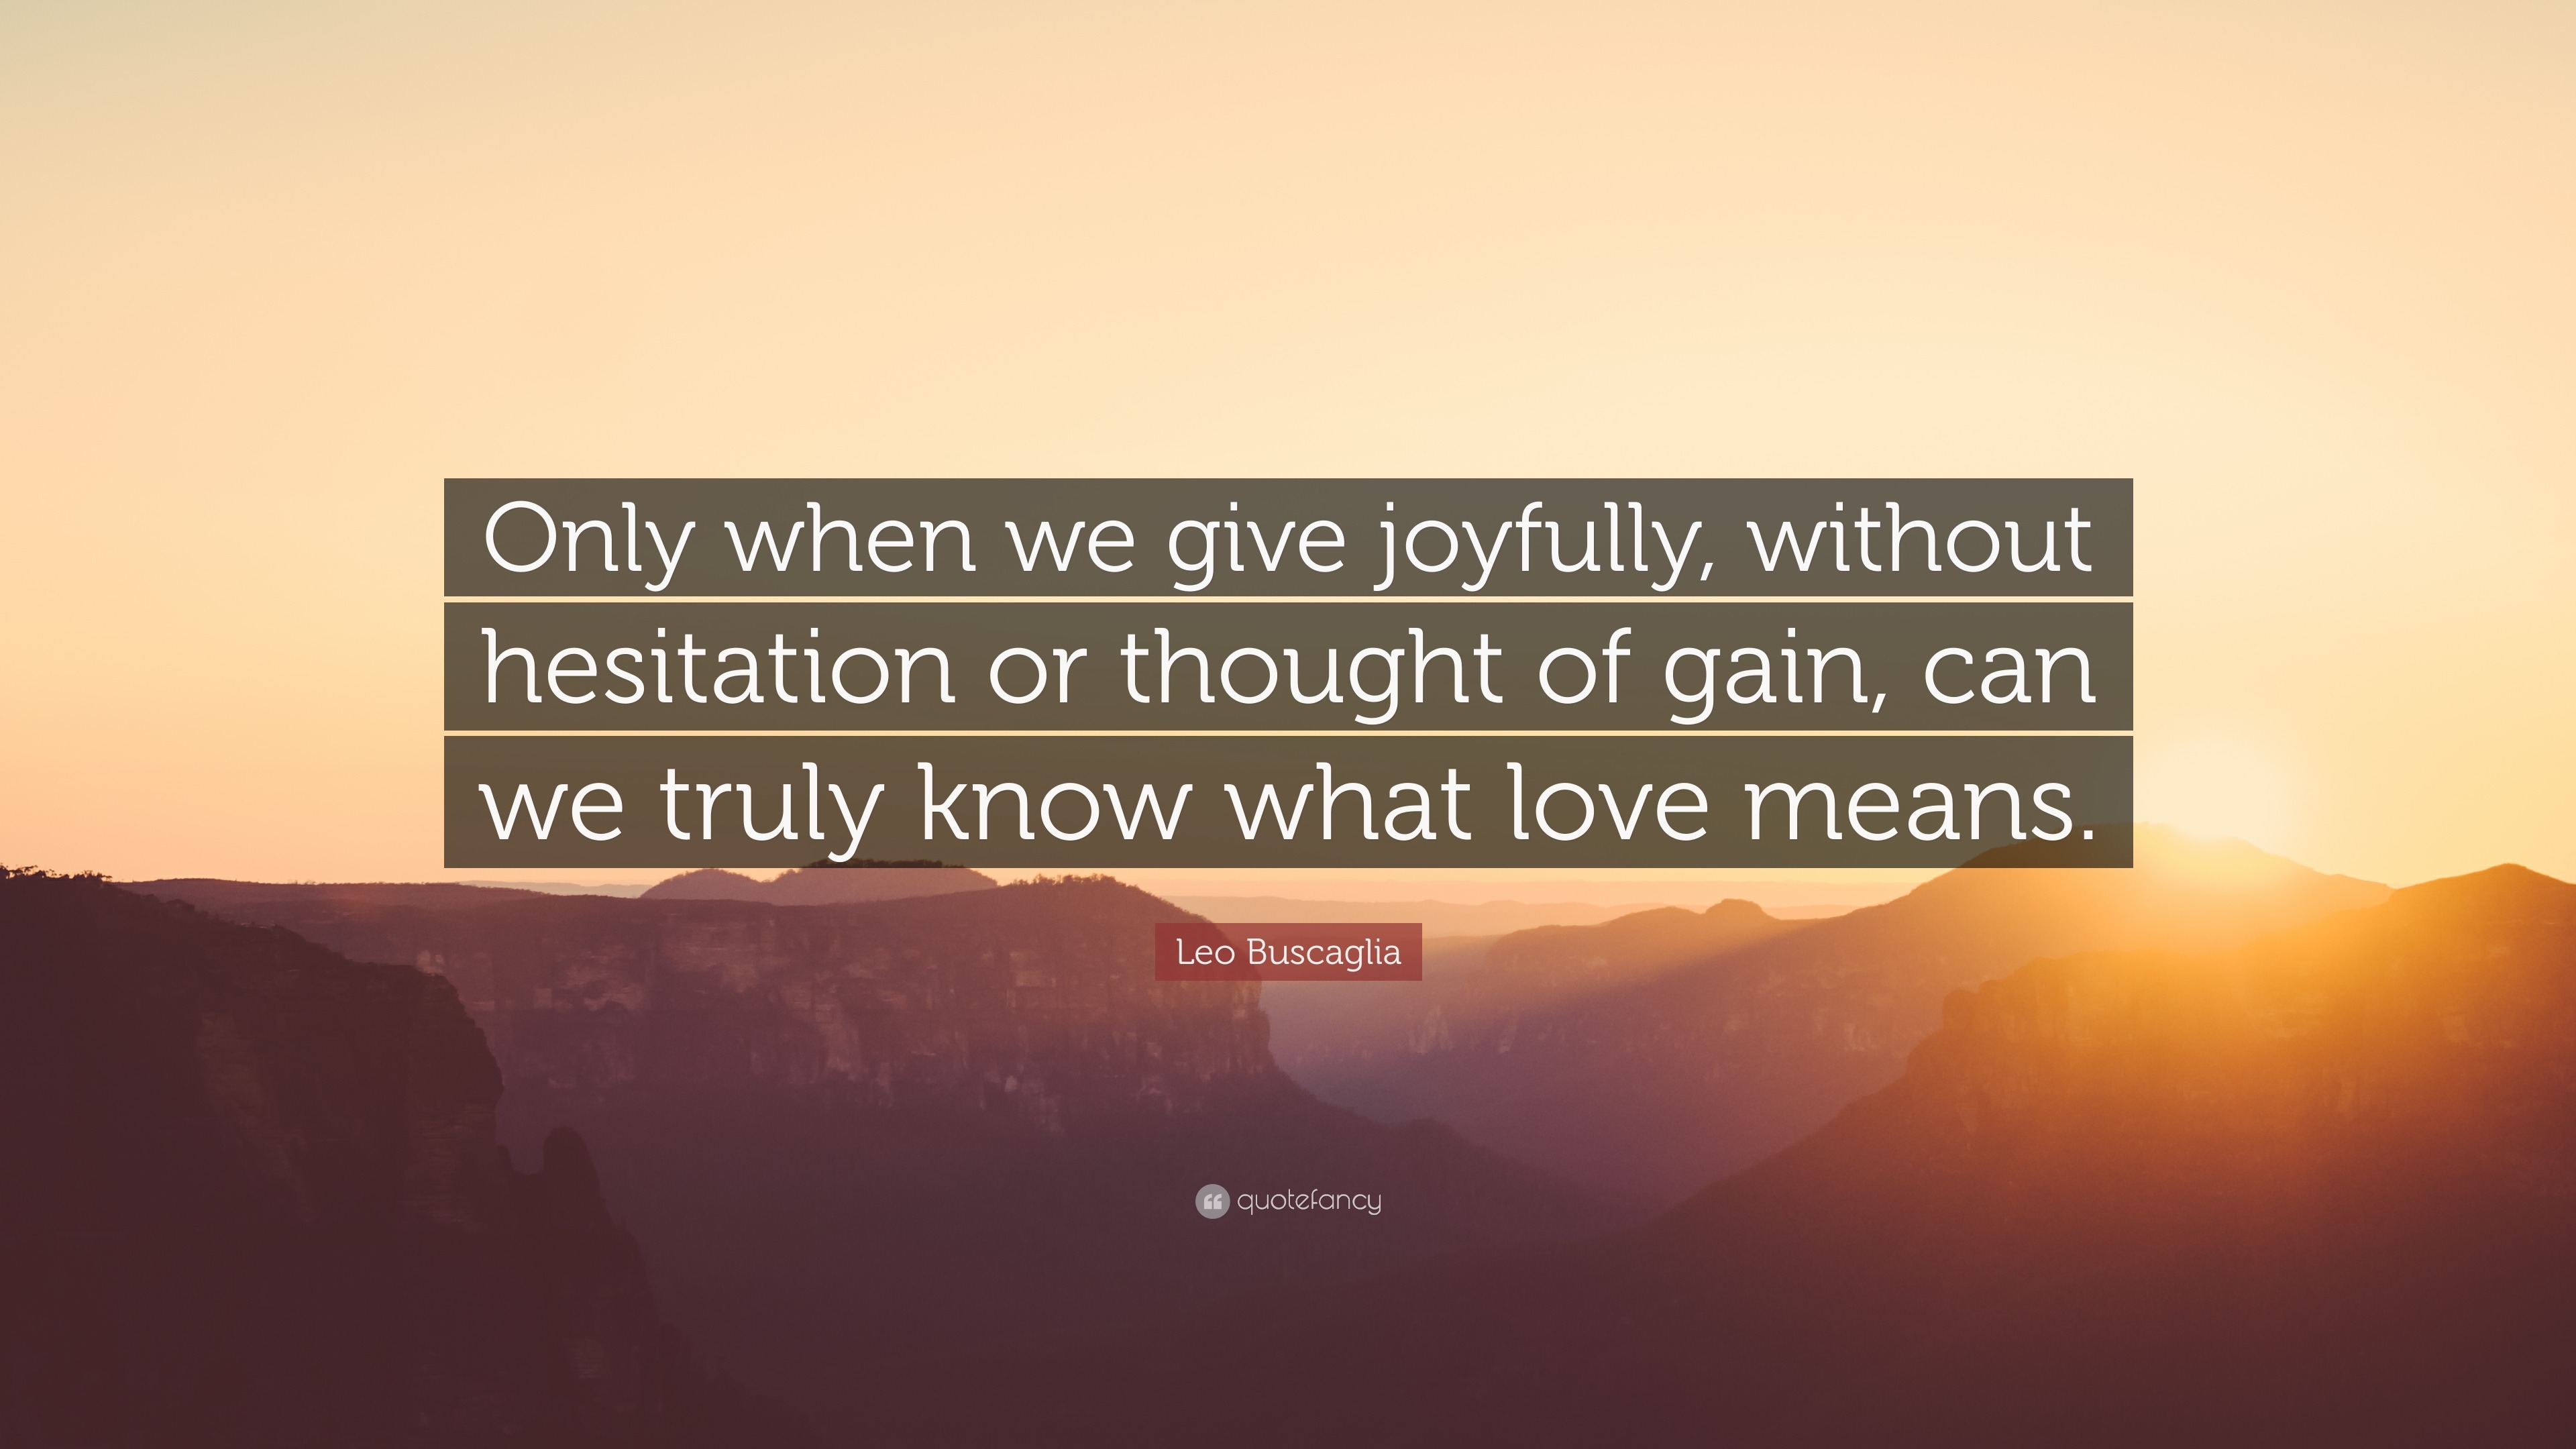 Leo Buscaglia Quote: "Only when we give joyfully, without hesitation or thought of gain, can we ...